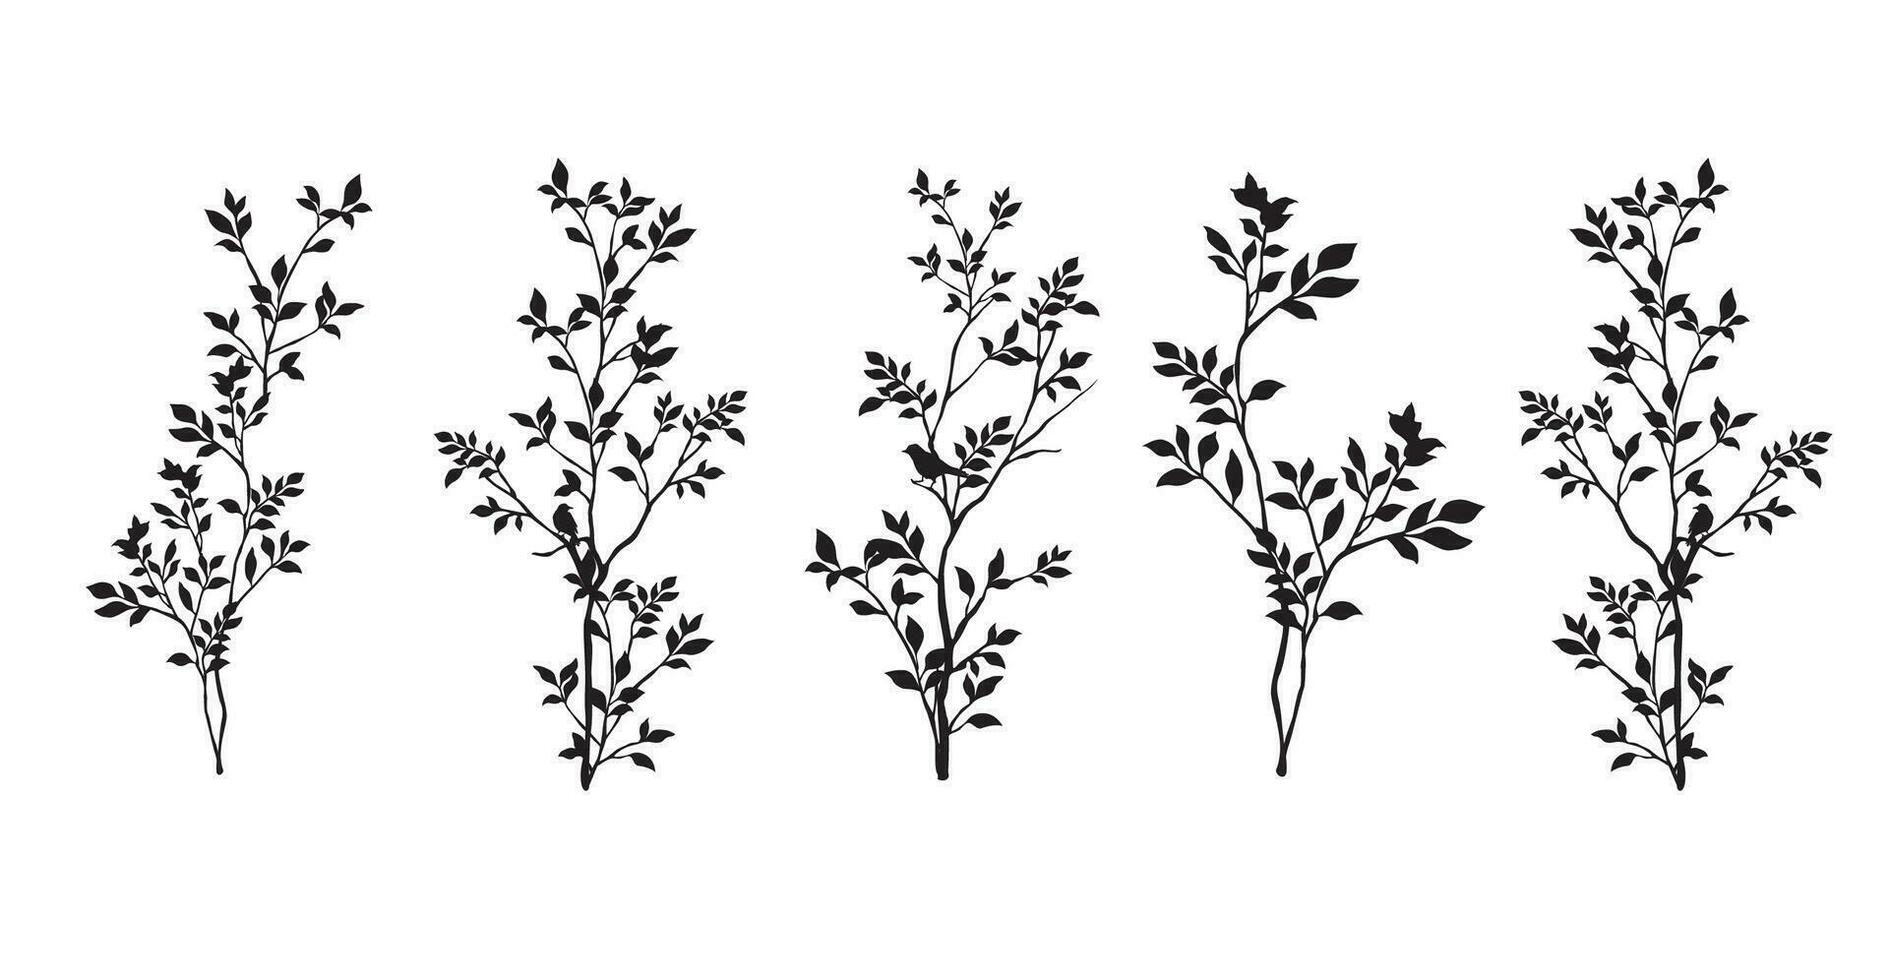 Traditional Indian Mughal plant illustration. Indian Folk Art, Mughal Floral wall painting. vector